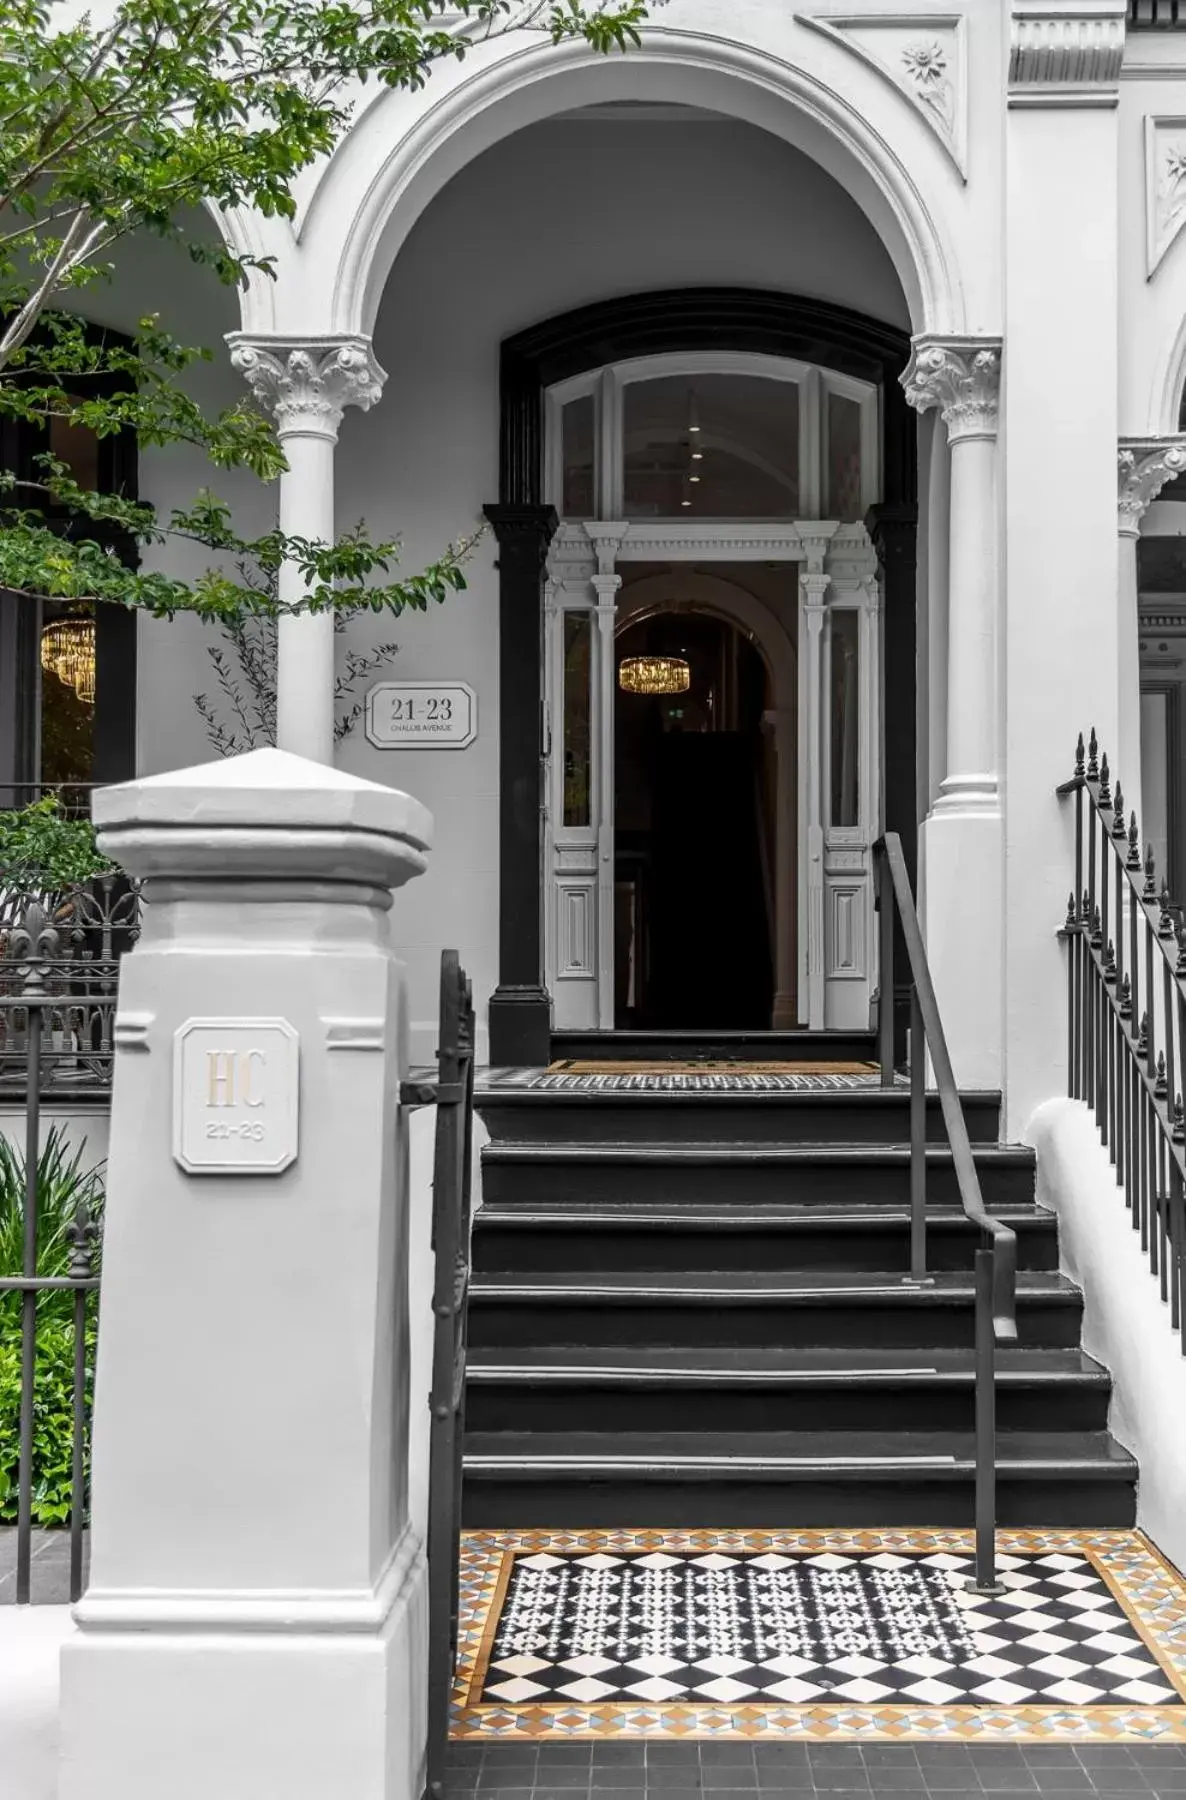 Facade/entrance in Hotel Challis Potts Point